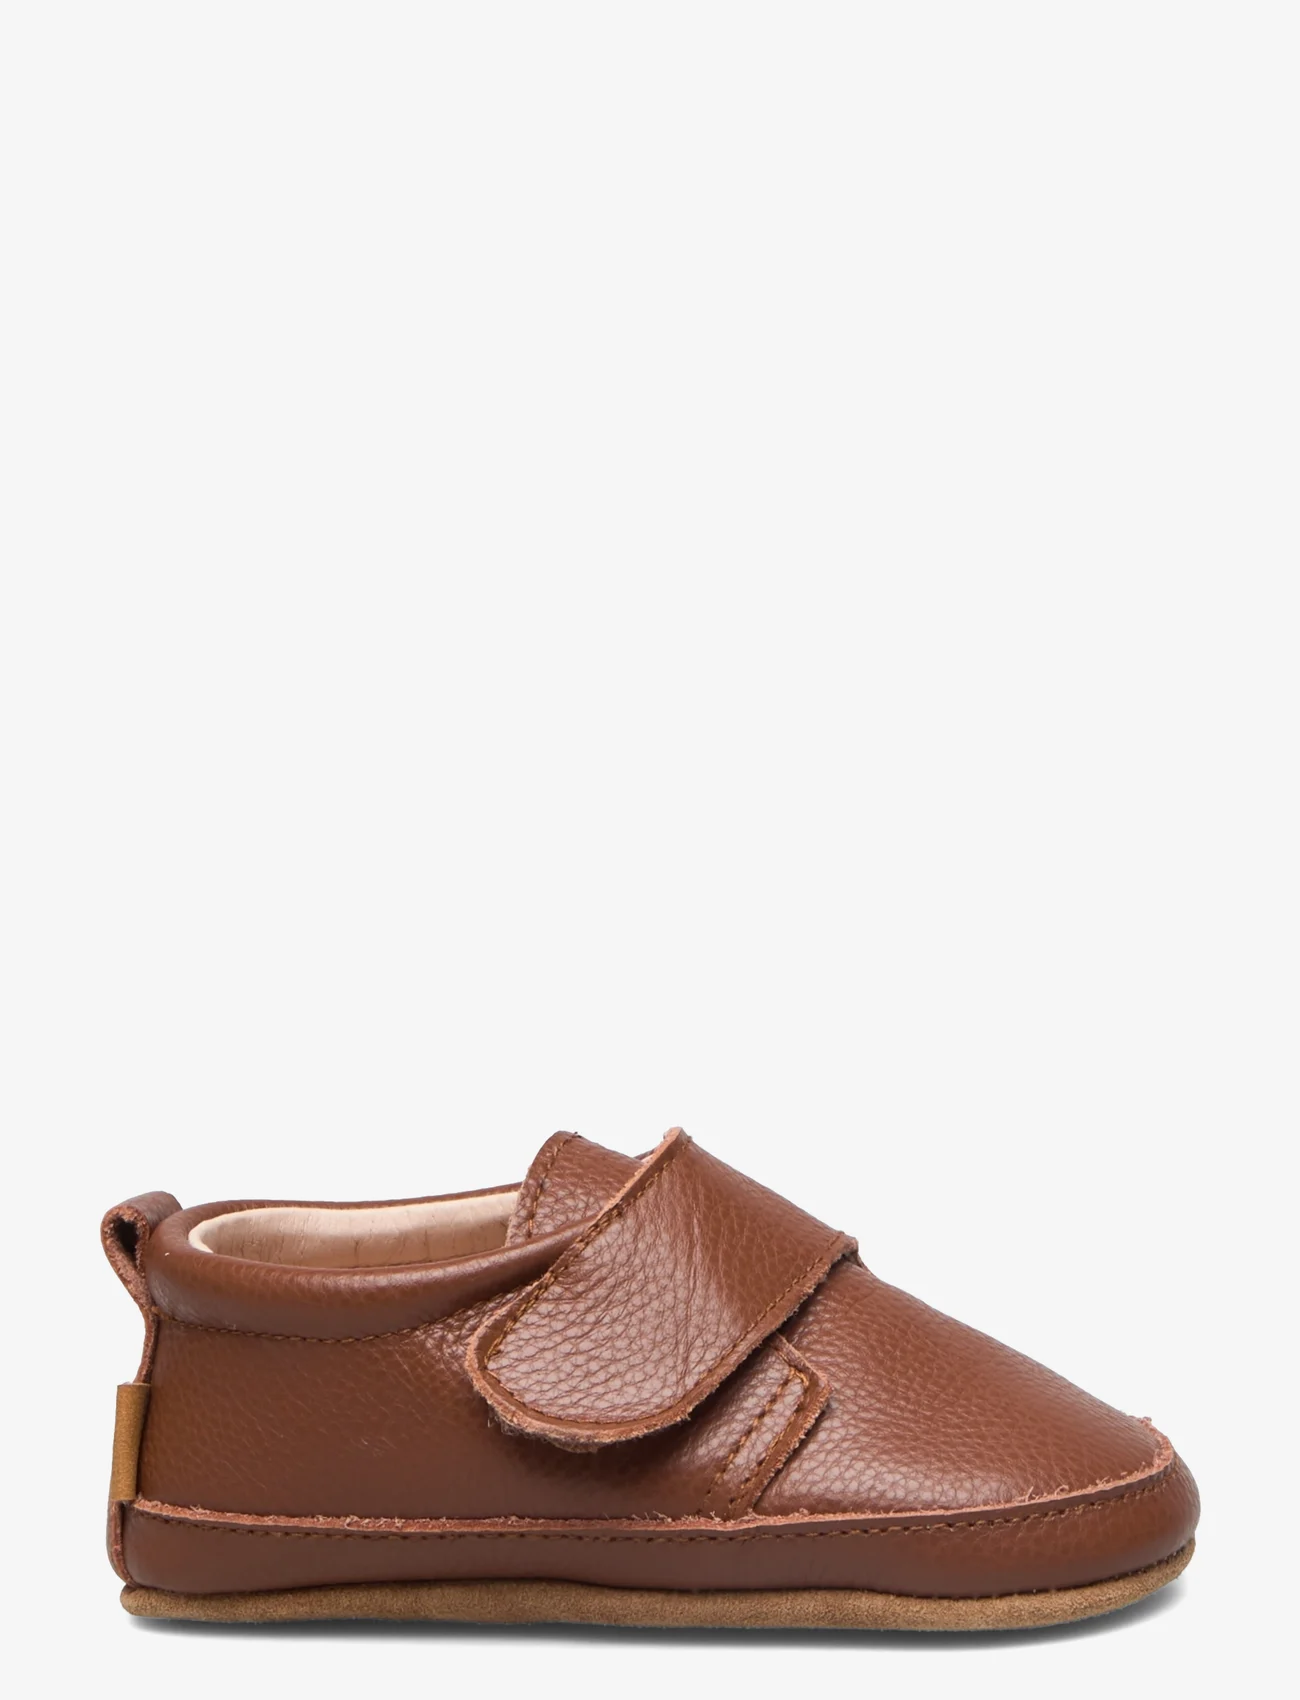 Melton - Luxury leather slippers - lowest prices - tortoise shell - 1